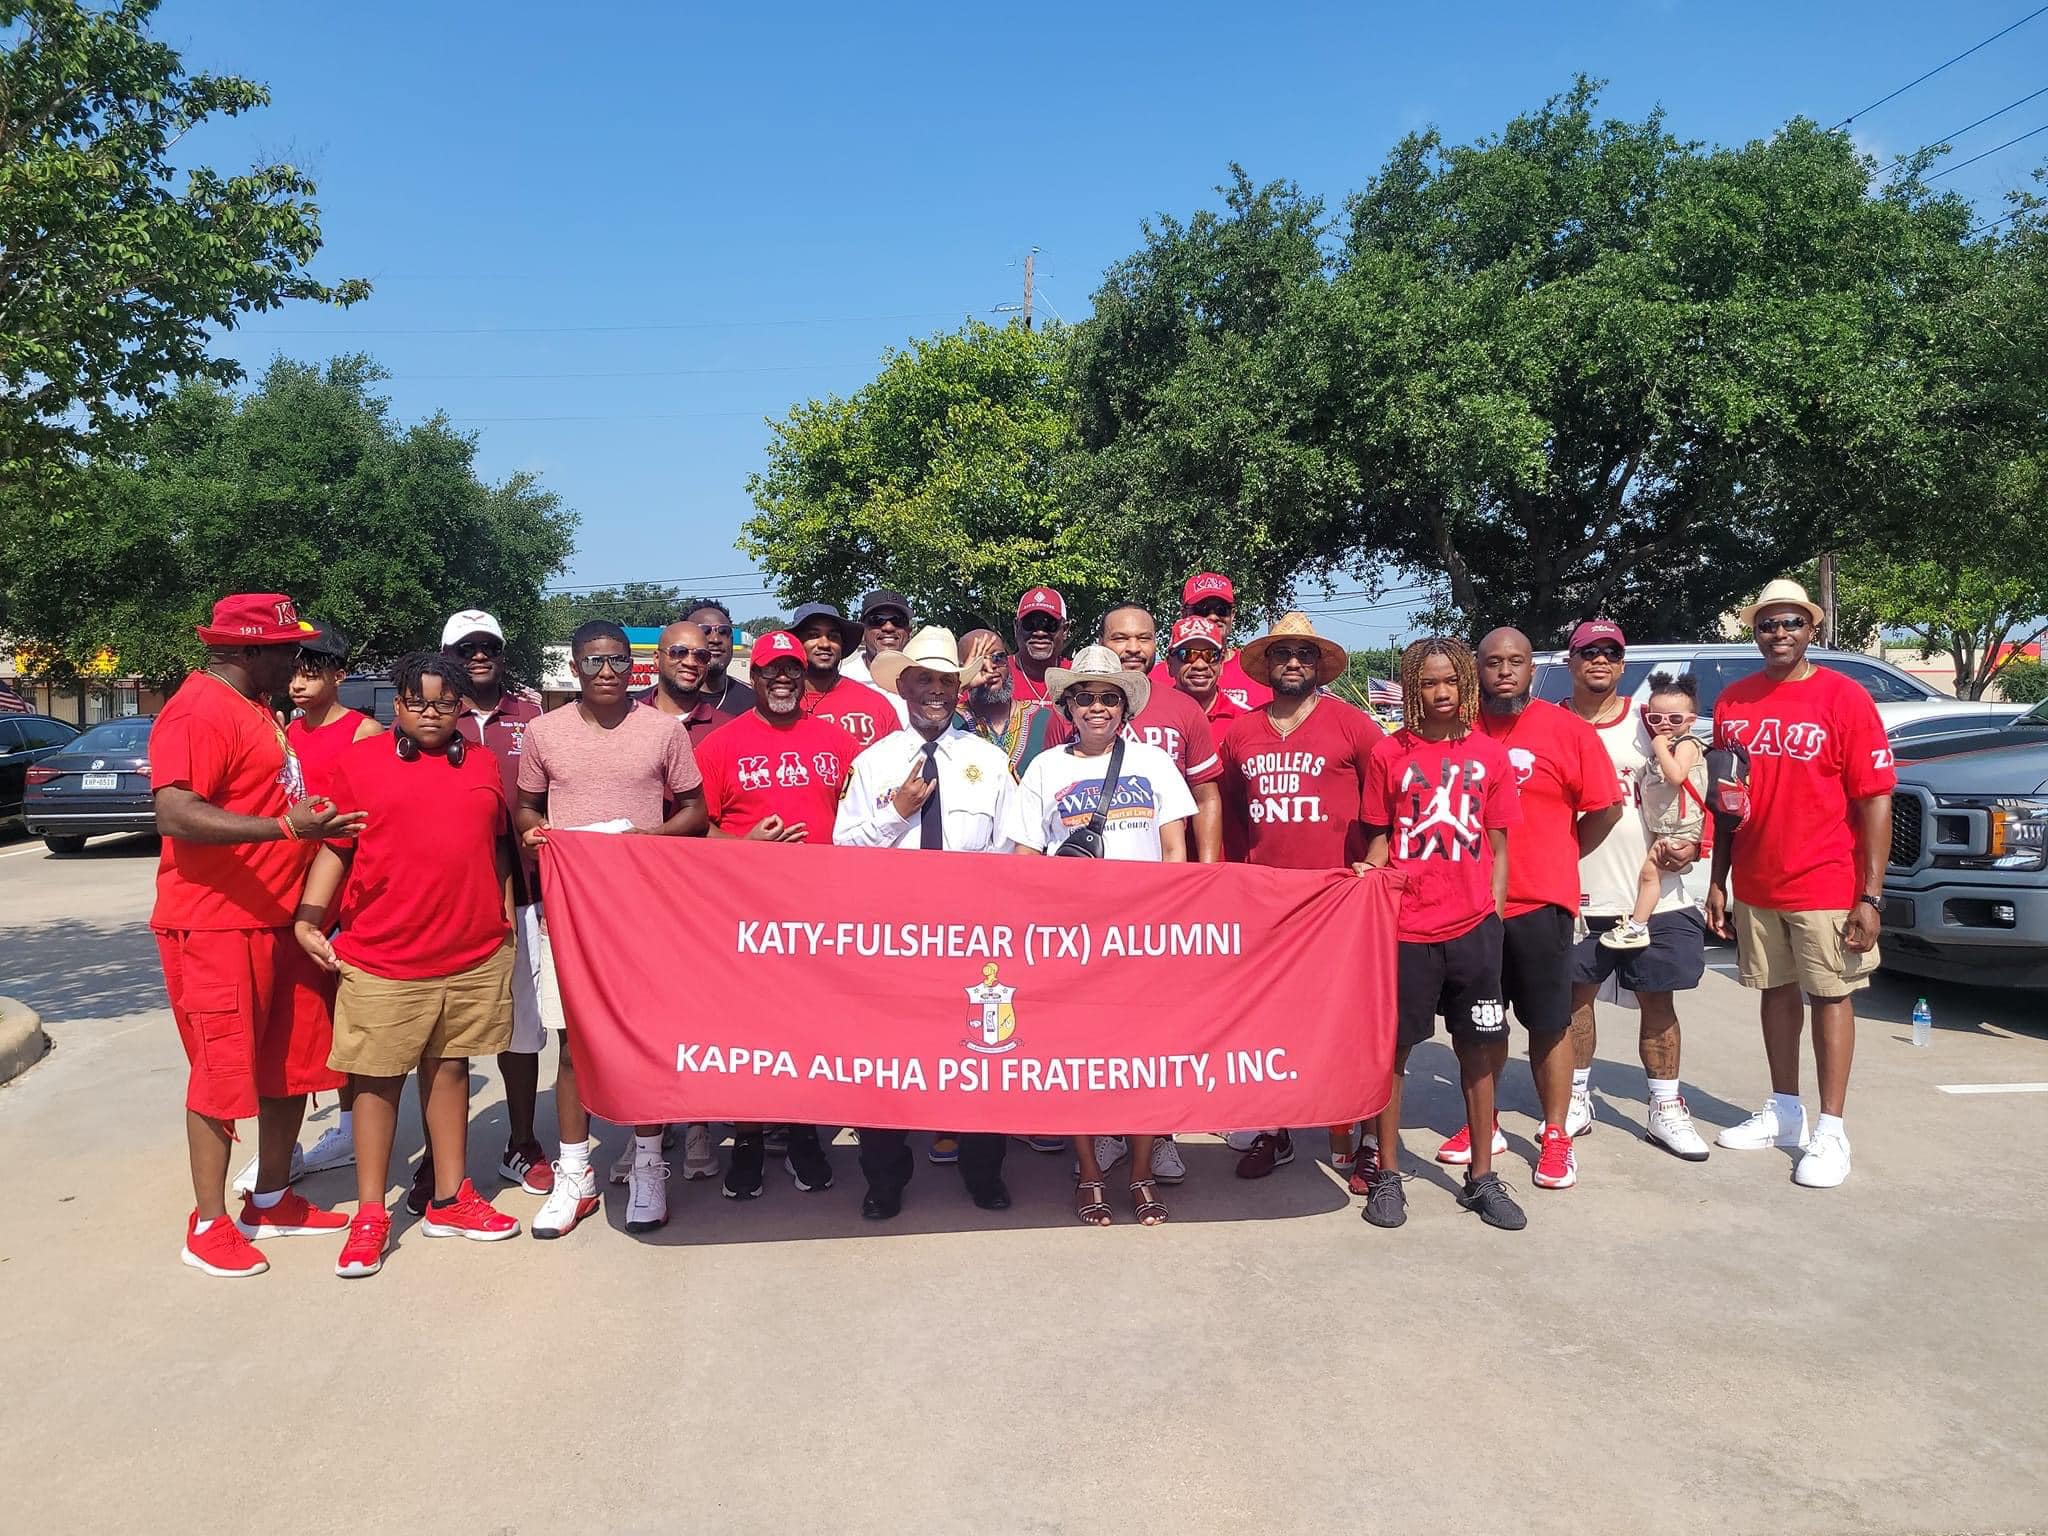 Second Annual Katy Juneteenth Parade & Festival Set for June 19